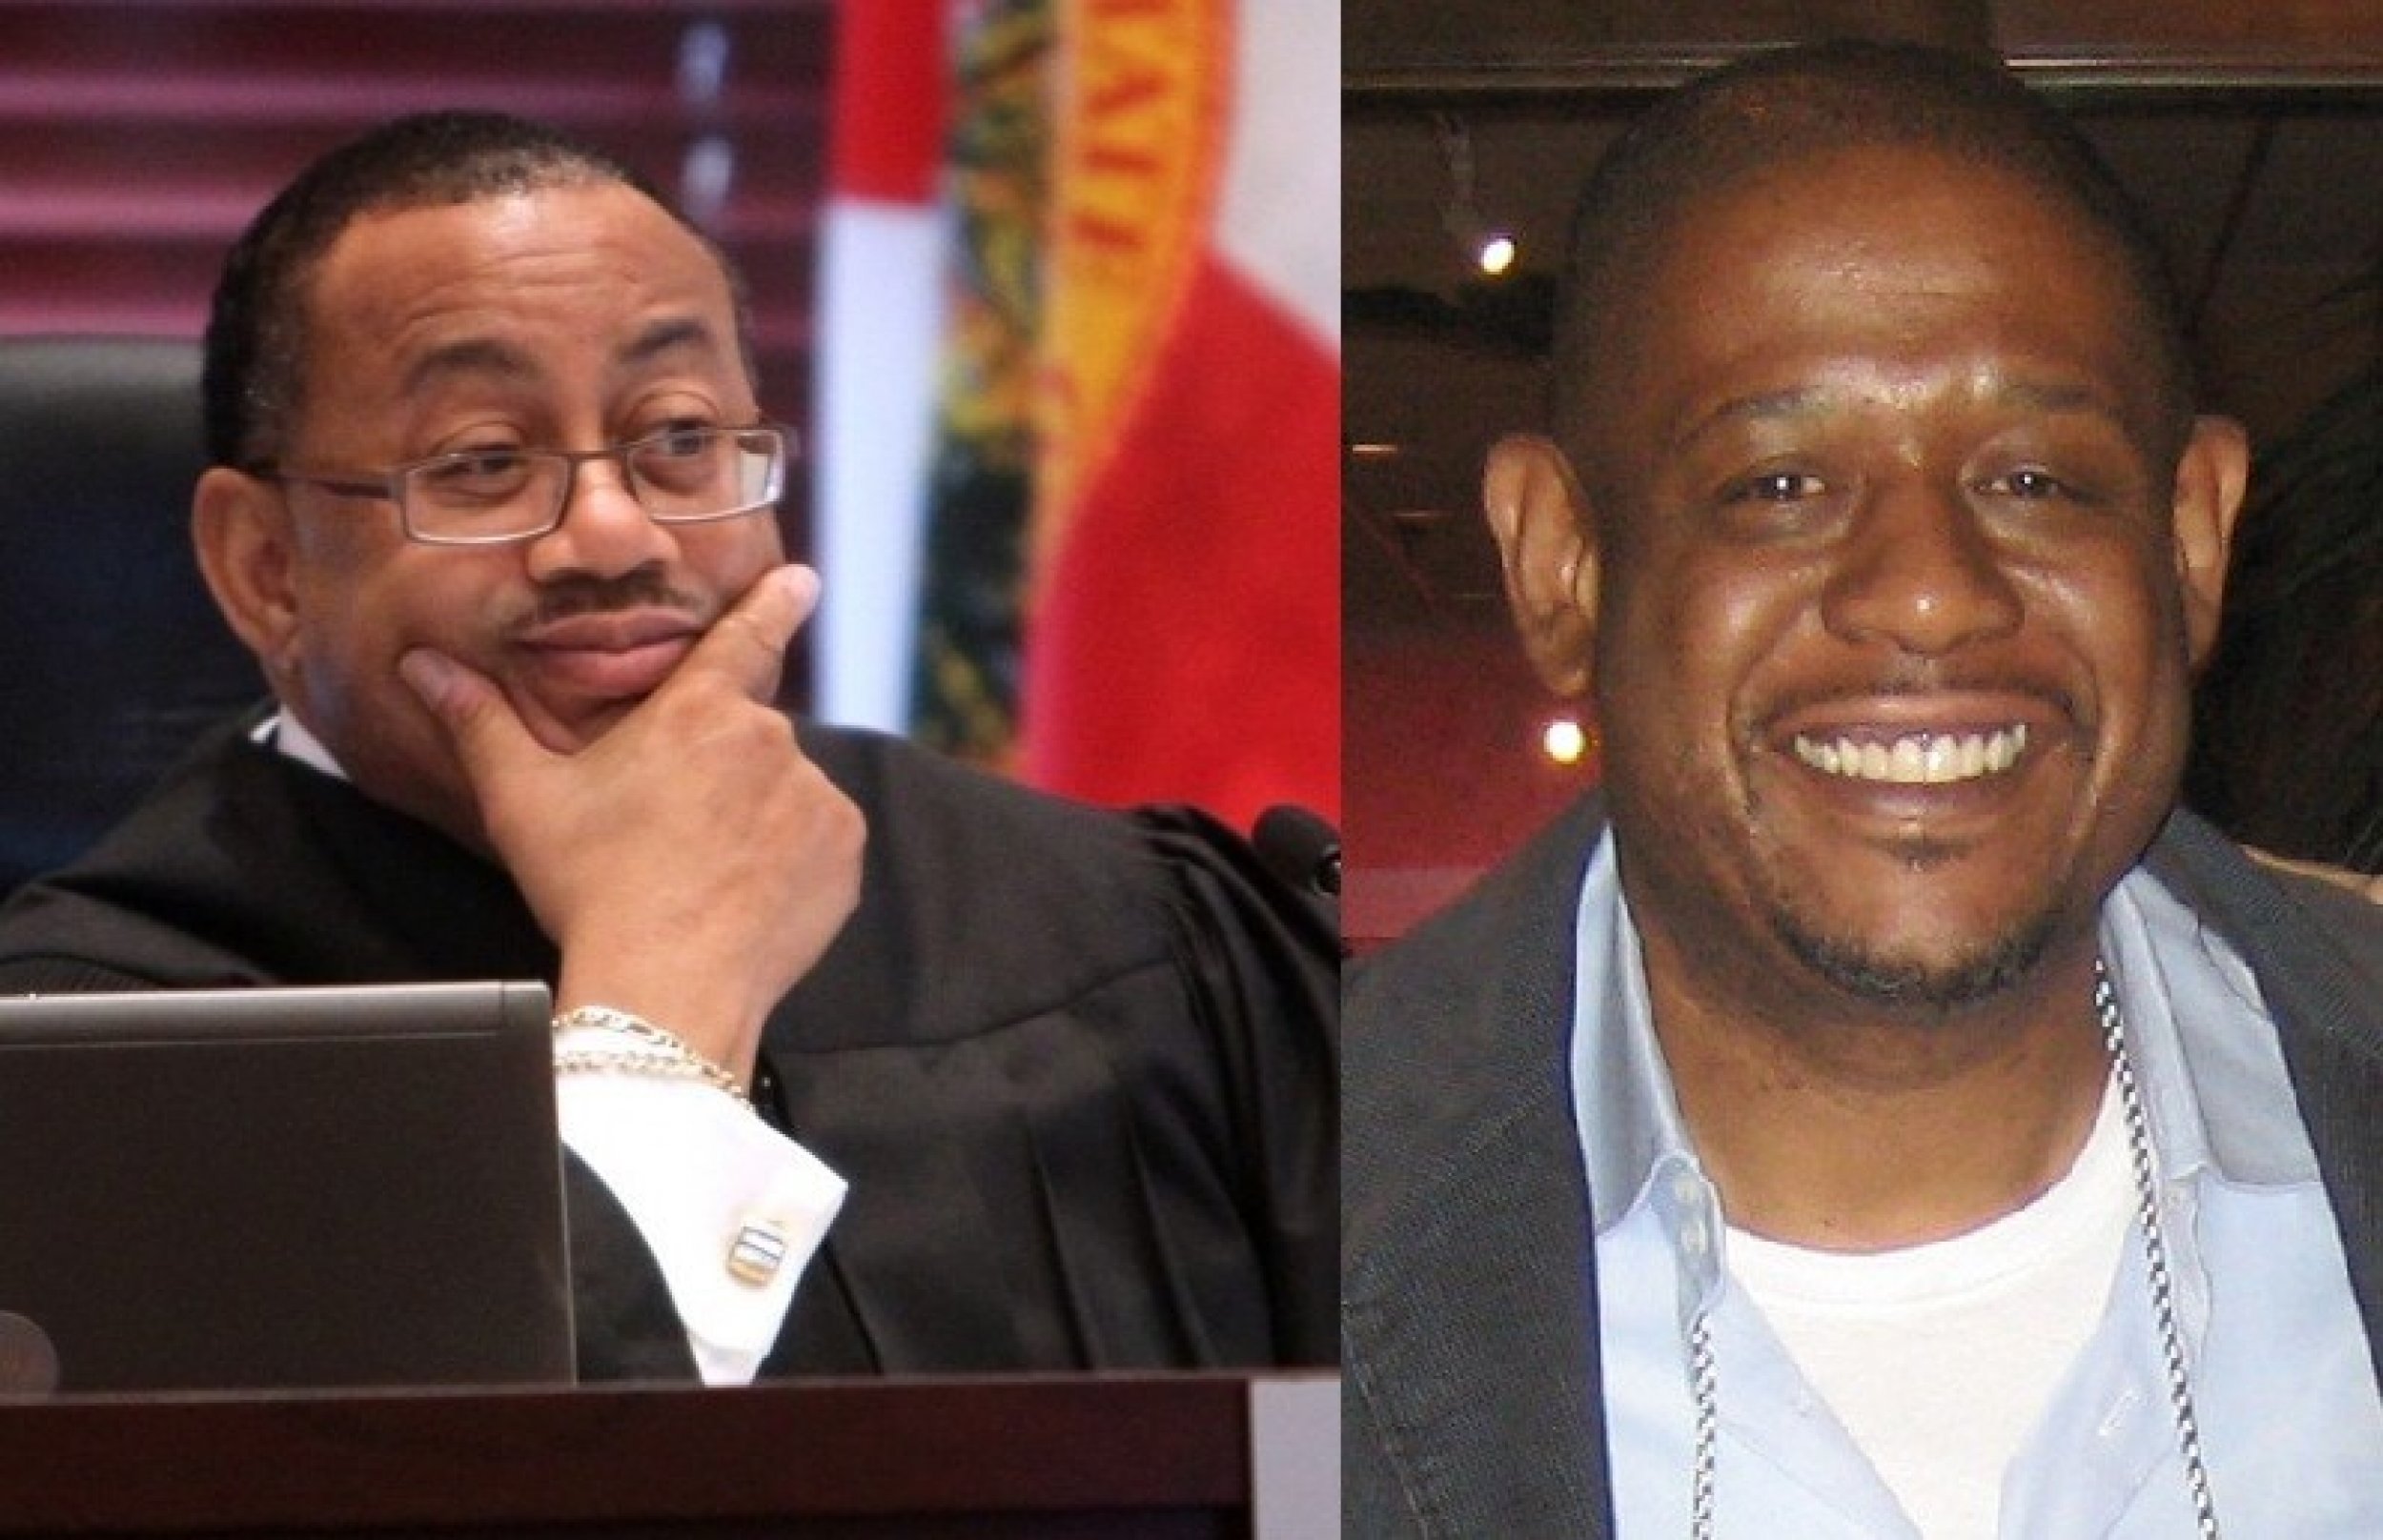  Forest Whitaker as Belvin Perry, Chief Judge of the Murder Trial